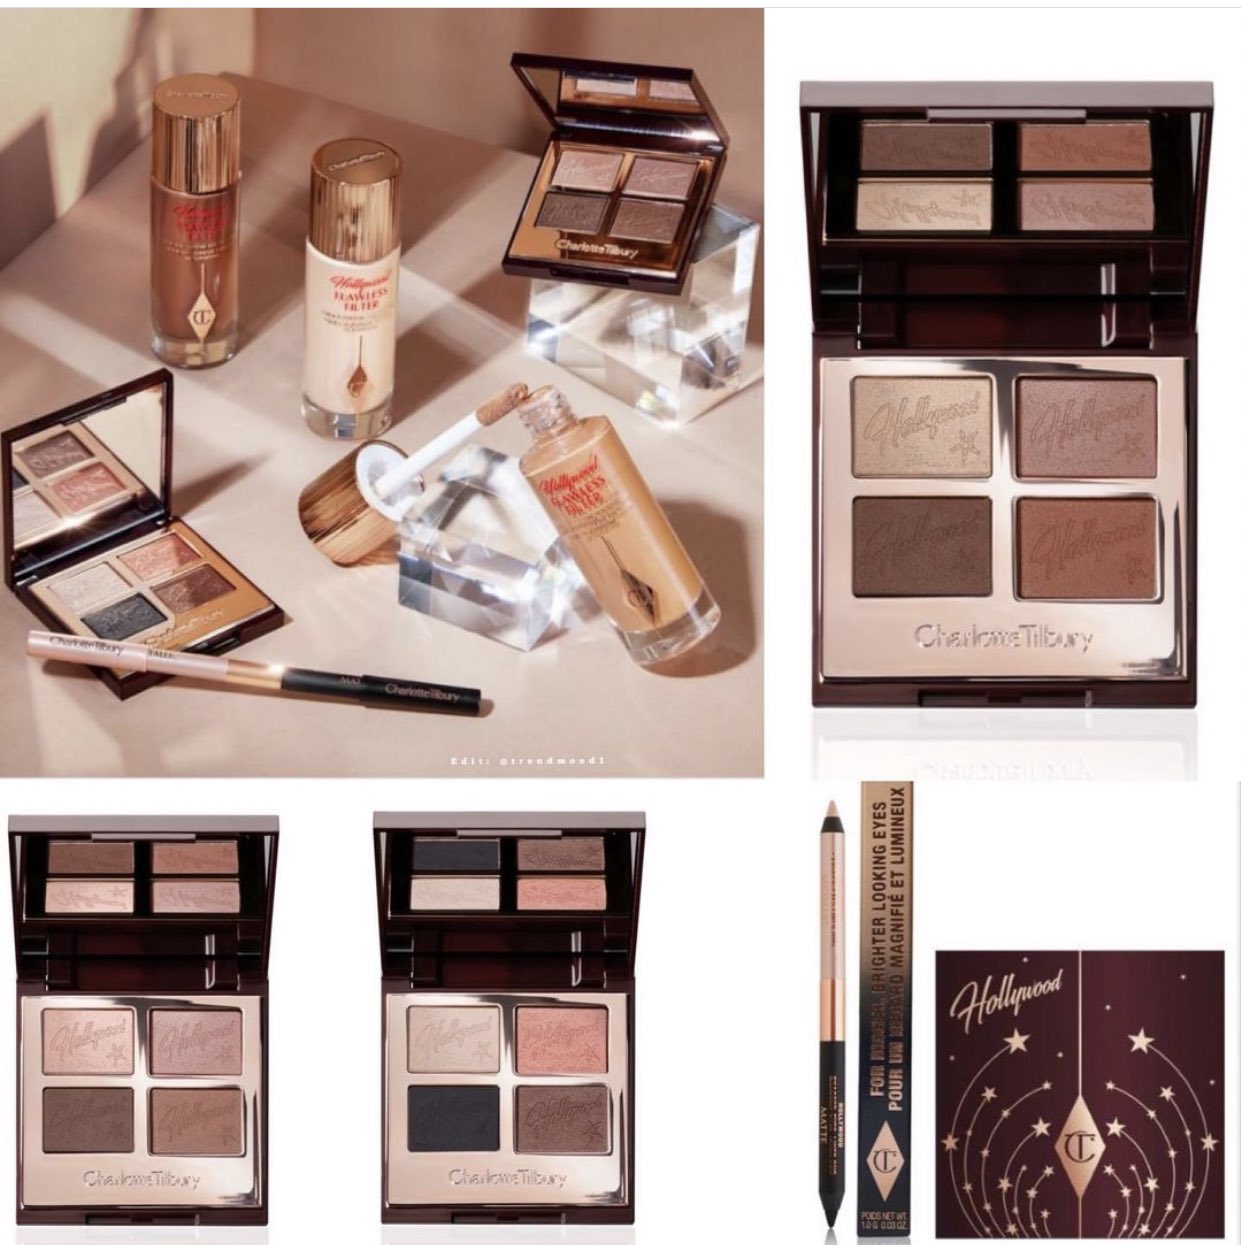 3 4 - Charlotte Tilbury Hollywood Flawless Filter makeup collection